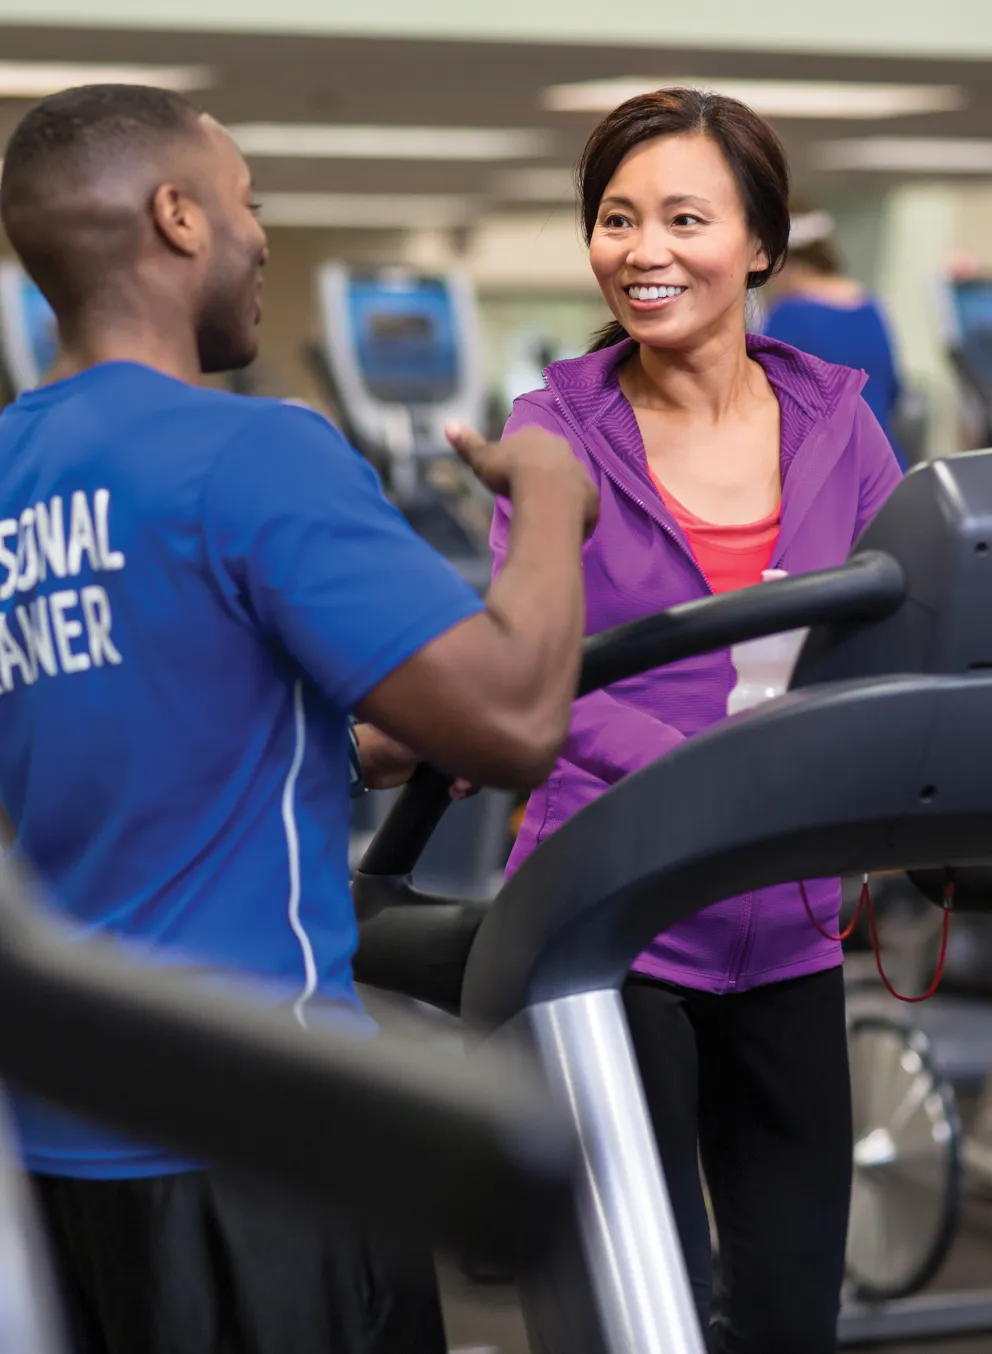 A personal trainer talks to a smiling woman who is on a treadmill